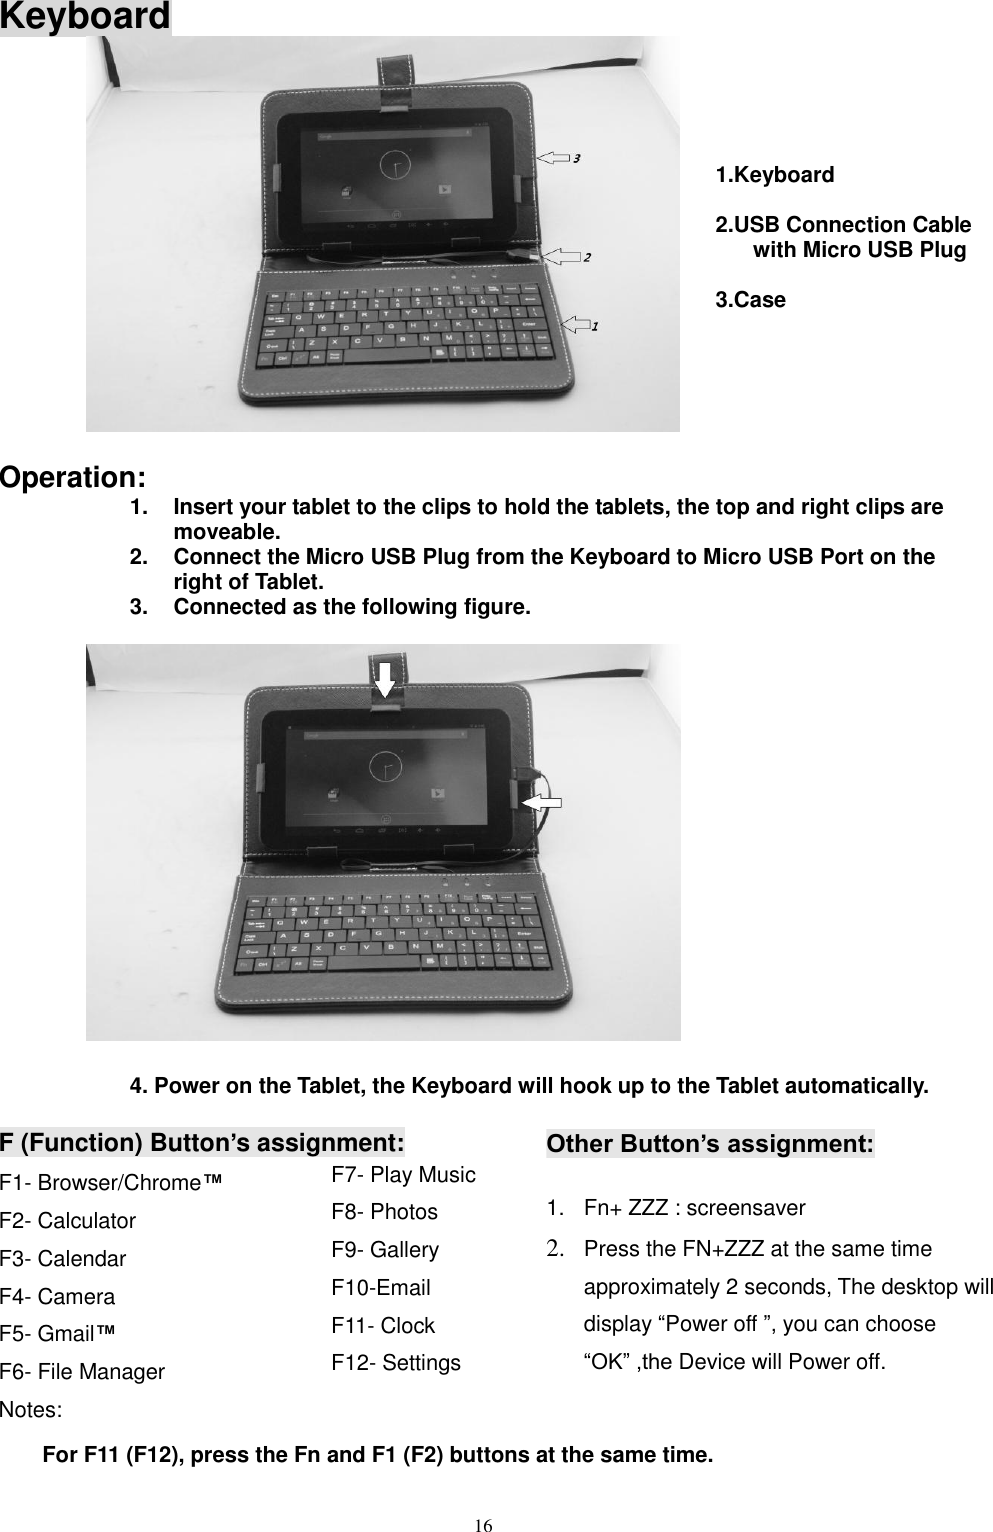  16  Keyboard           Operation: 1.  Insert your tablet to the clips to hold the tablets, the top and right clips are moveable. 2.  Connect the Micro USB Plug from the Keyboard to Micro USB Port on the right of Tablet. 3.  Connected as the following figure.                4. Power on the Tablet, the Keyboard will hook up to the Tablet automatically.  F (Function) Button’s assignment: F1- Browser/Chrome™ F2- Calculator F3- Calendar F4- Camera F5- Gmail™ F6- File Manager Notes:  For F11 (F12), press the Fn and F1 (F2) buttons at the same time. F7- Play Music F8- Photos F9- Gallery F10-Email F11- Clock F12- Settings  Other Button’s assignment:  1.  Fn+ ZZZ : screensaver 2. Press the FN+ZZZ at the same time approximately 2 seconds, The desktop will display “Power off ”, you can choose “OK” ,the Device will Power off.  1.Keyboard  2.USB Connection Cable with Micro USB Plug  3.Case  